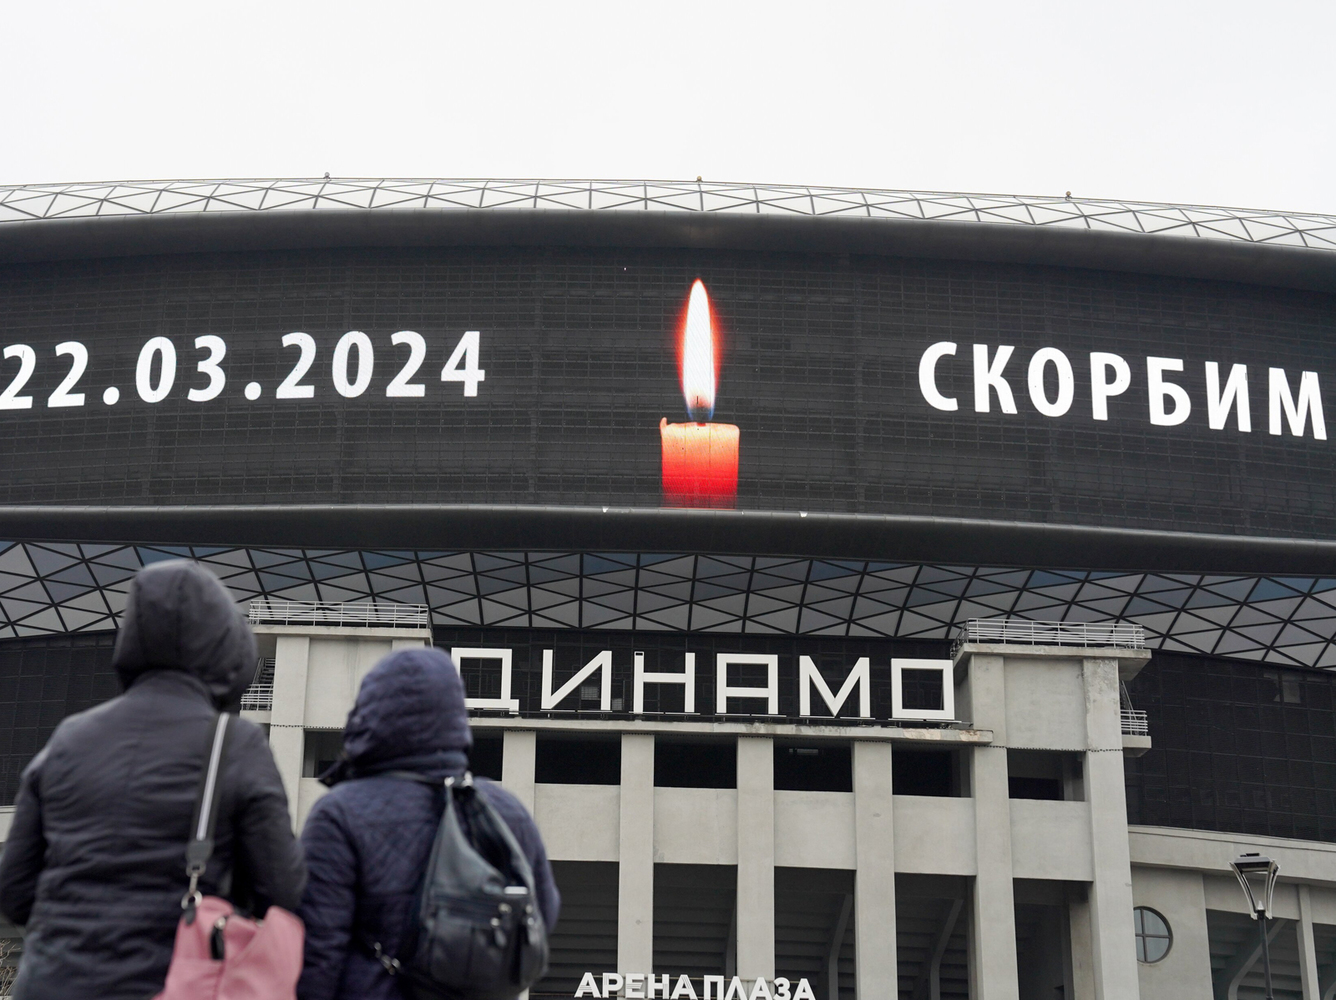 In Russia, a day of mourning for the dead Crocus: Moscow “dressed” in black, banners, screens